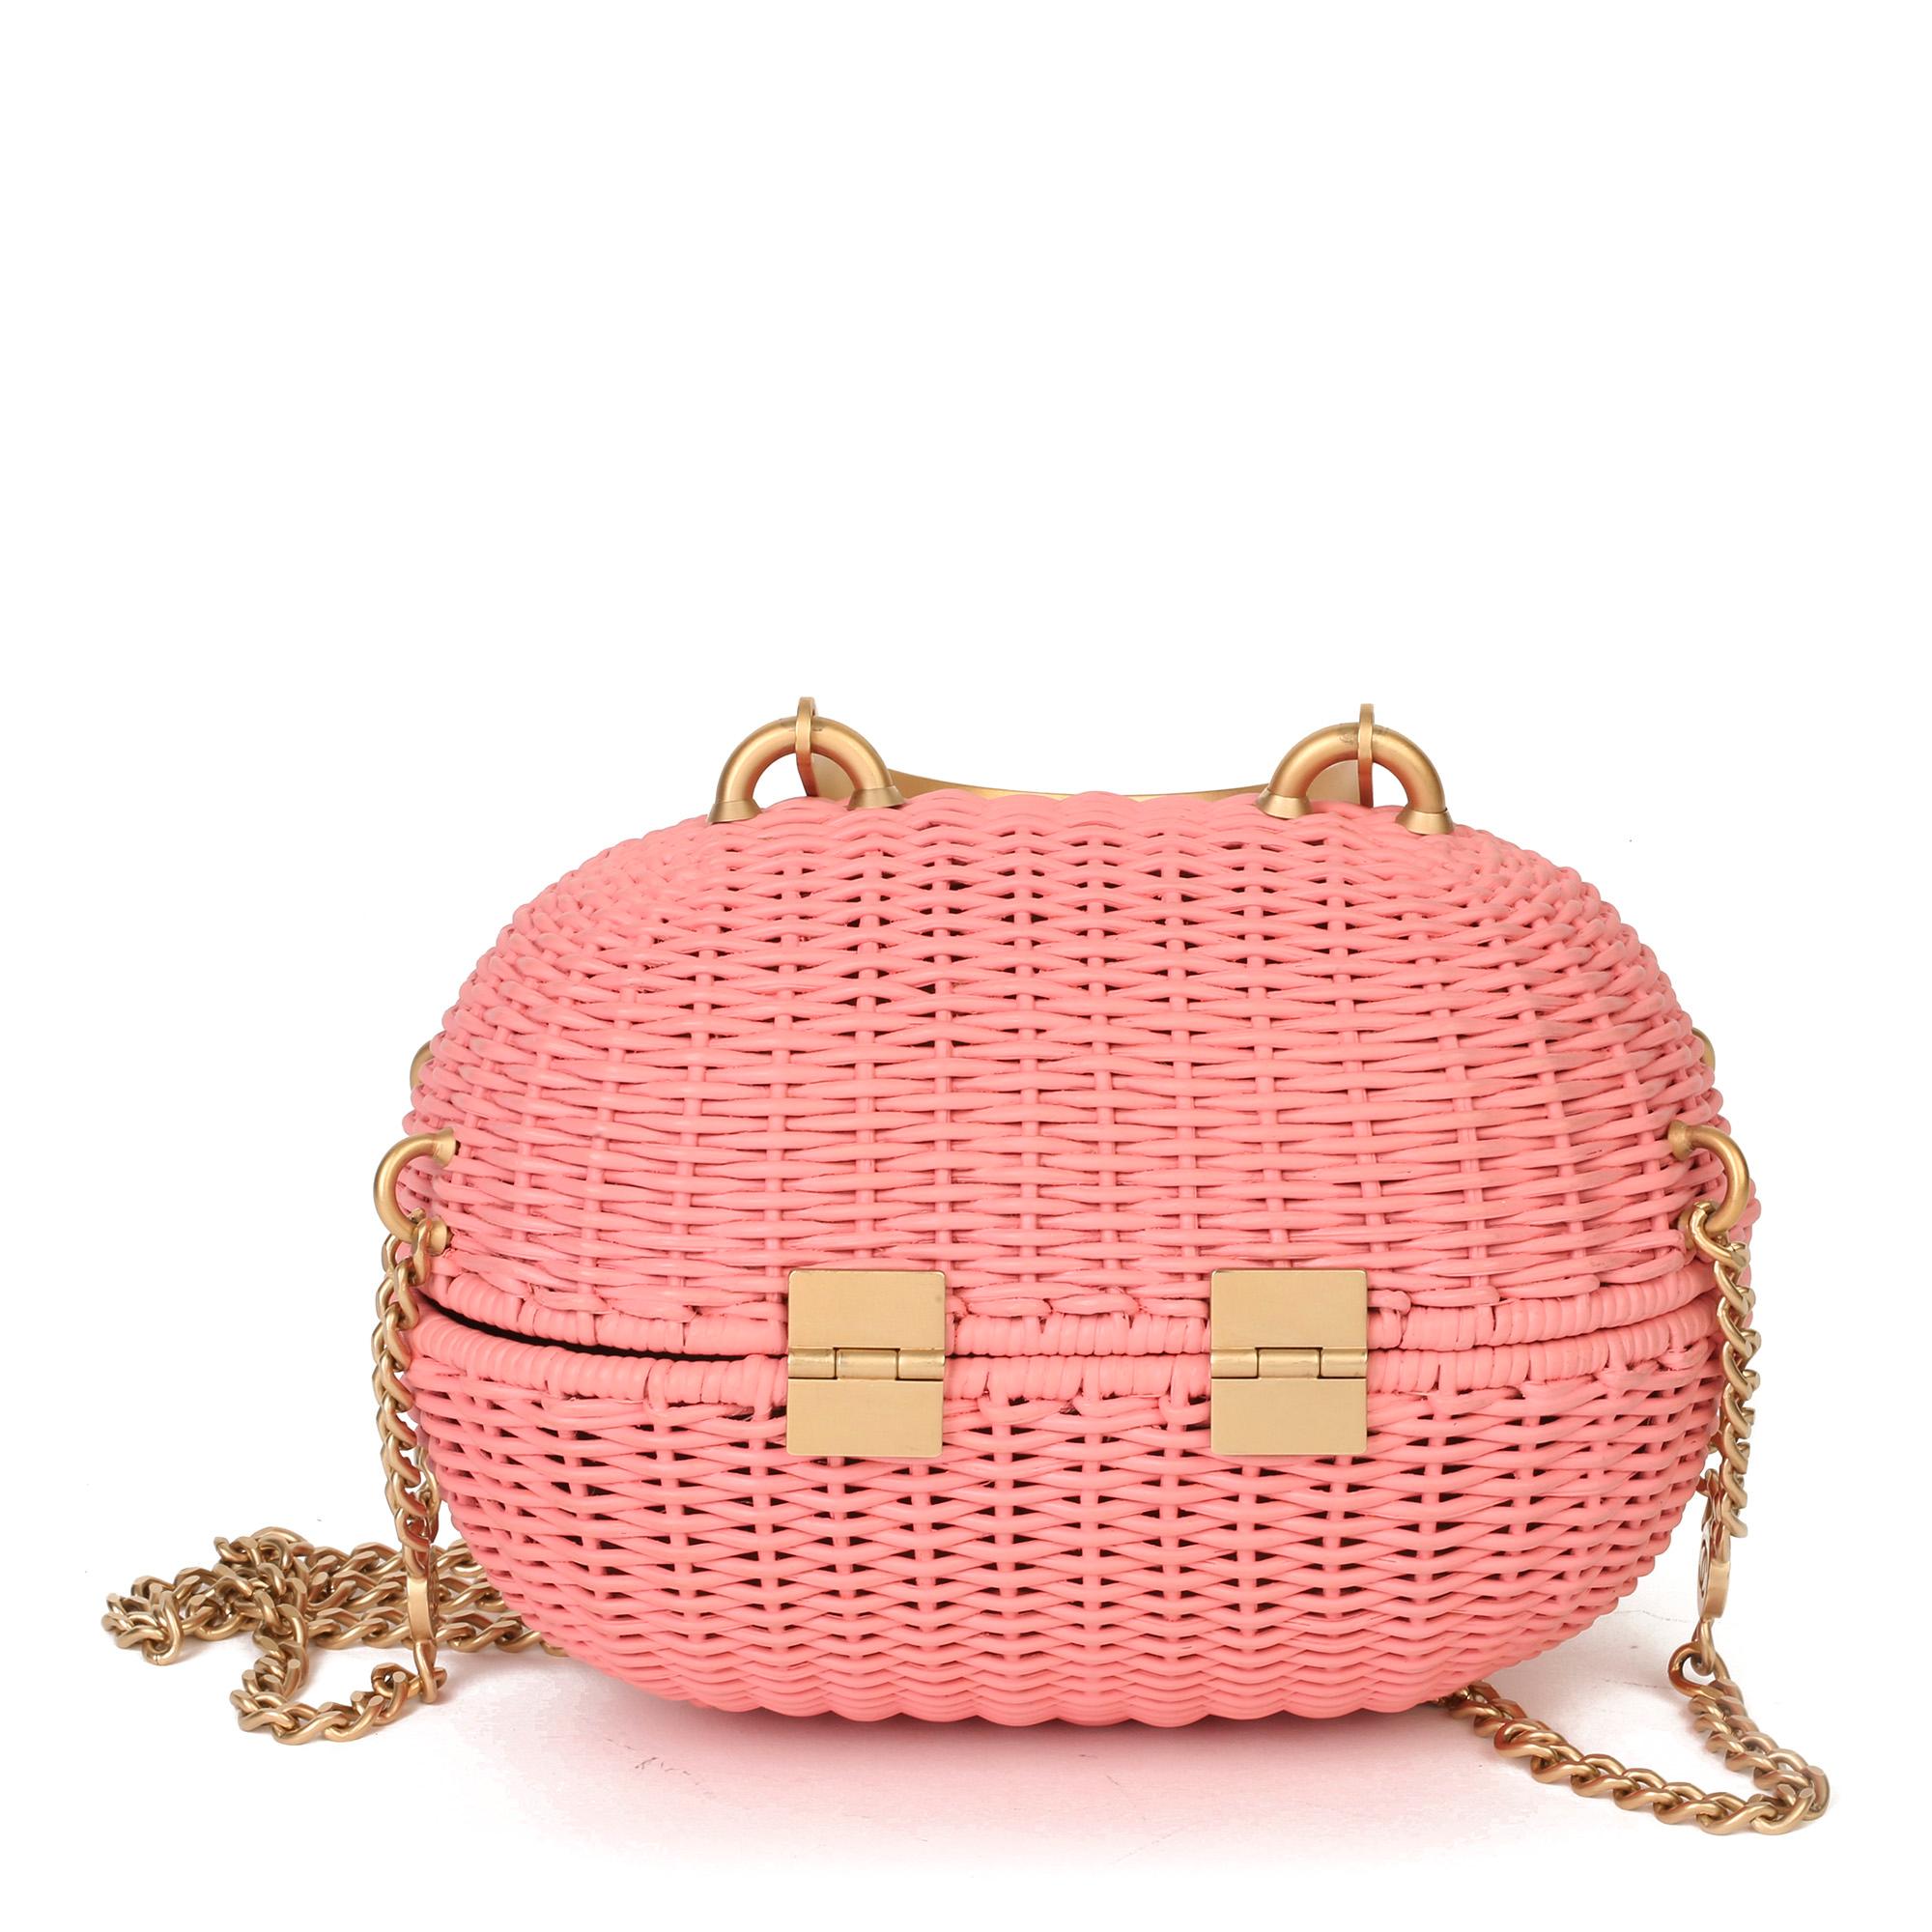 CHANEL
Pink Woven Wicker Love Lock Basket Bag

Xupes Reference: HBJJLG025
Serial Number: 9563171
Age (Circa): 2005
Accompanied By: Chanel Dust Bag, Box
Authenticity Details: Serial Sticker (Made in Italy)
Gender: Ladies
Type: Top Handle, Shoulder,